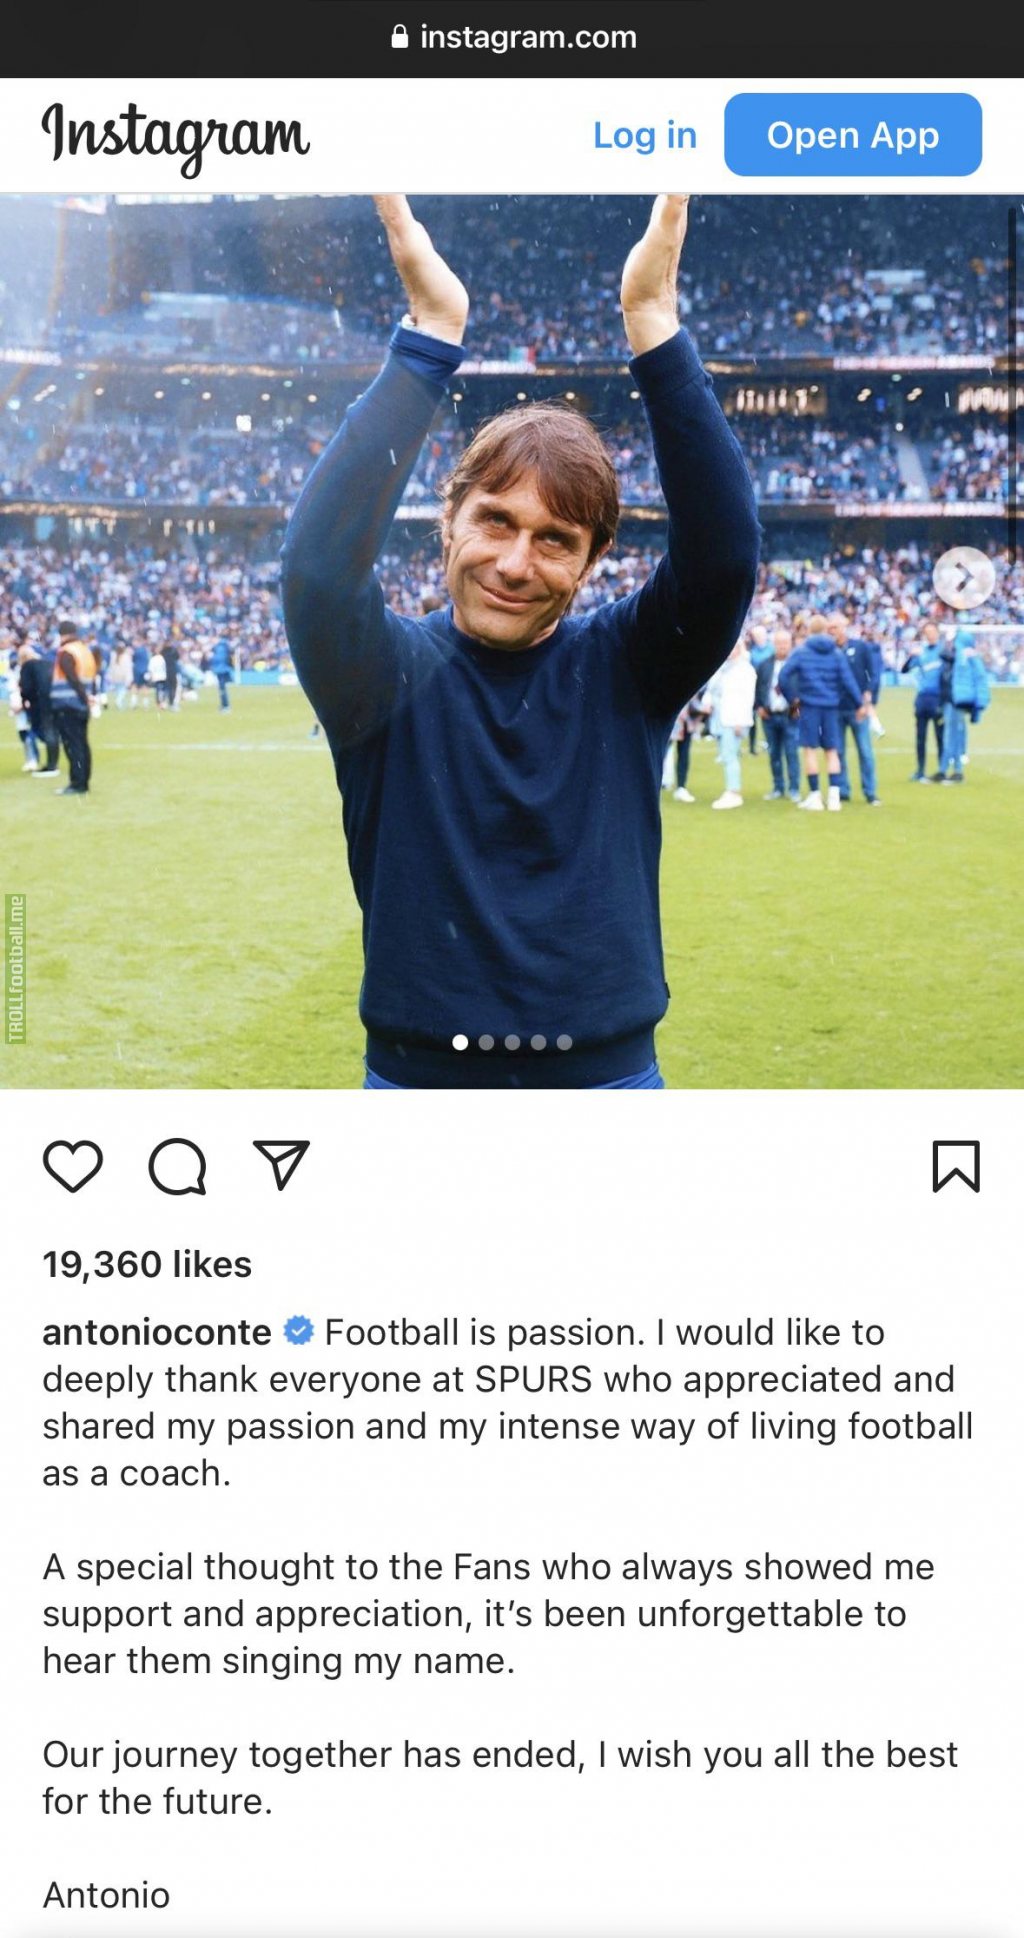 Antonio Conte on Instagram: “Football is passion. I thank everyone at Spurs who appreciated and shared my passion. Special thought to the Fans who always showed me support and appreciation, unforgettable to hear them singing my name. I wish you all the best for the future”. Antonio Conte.